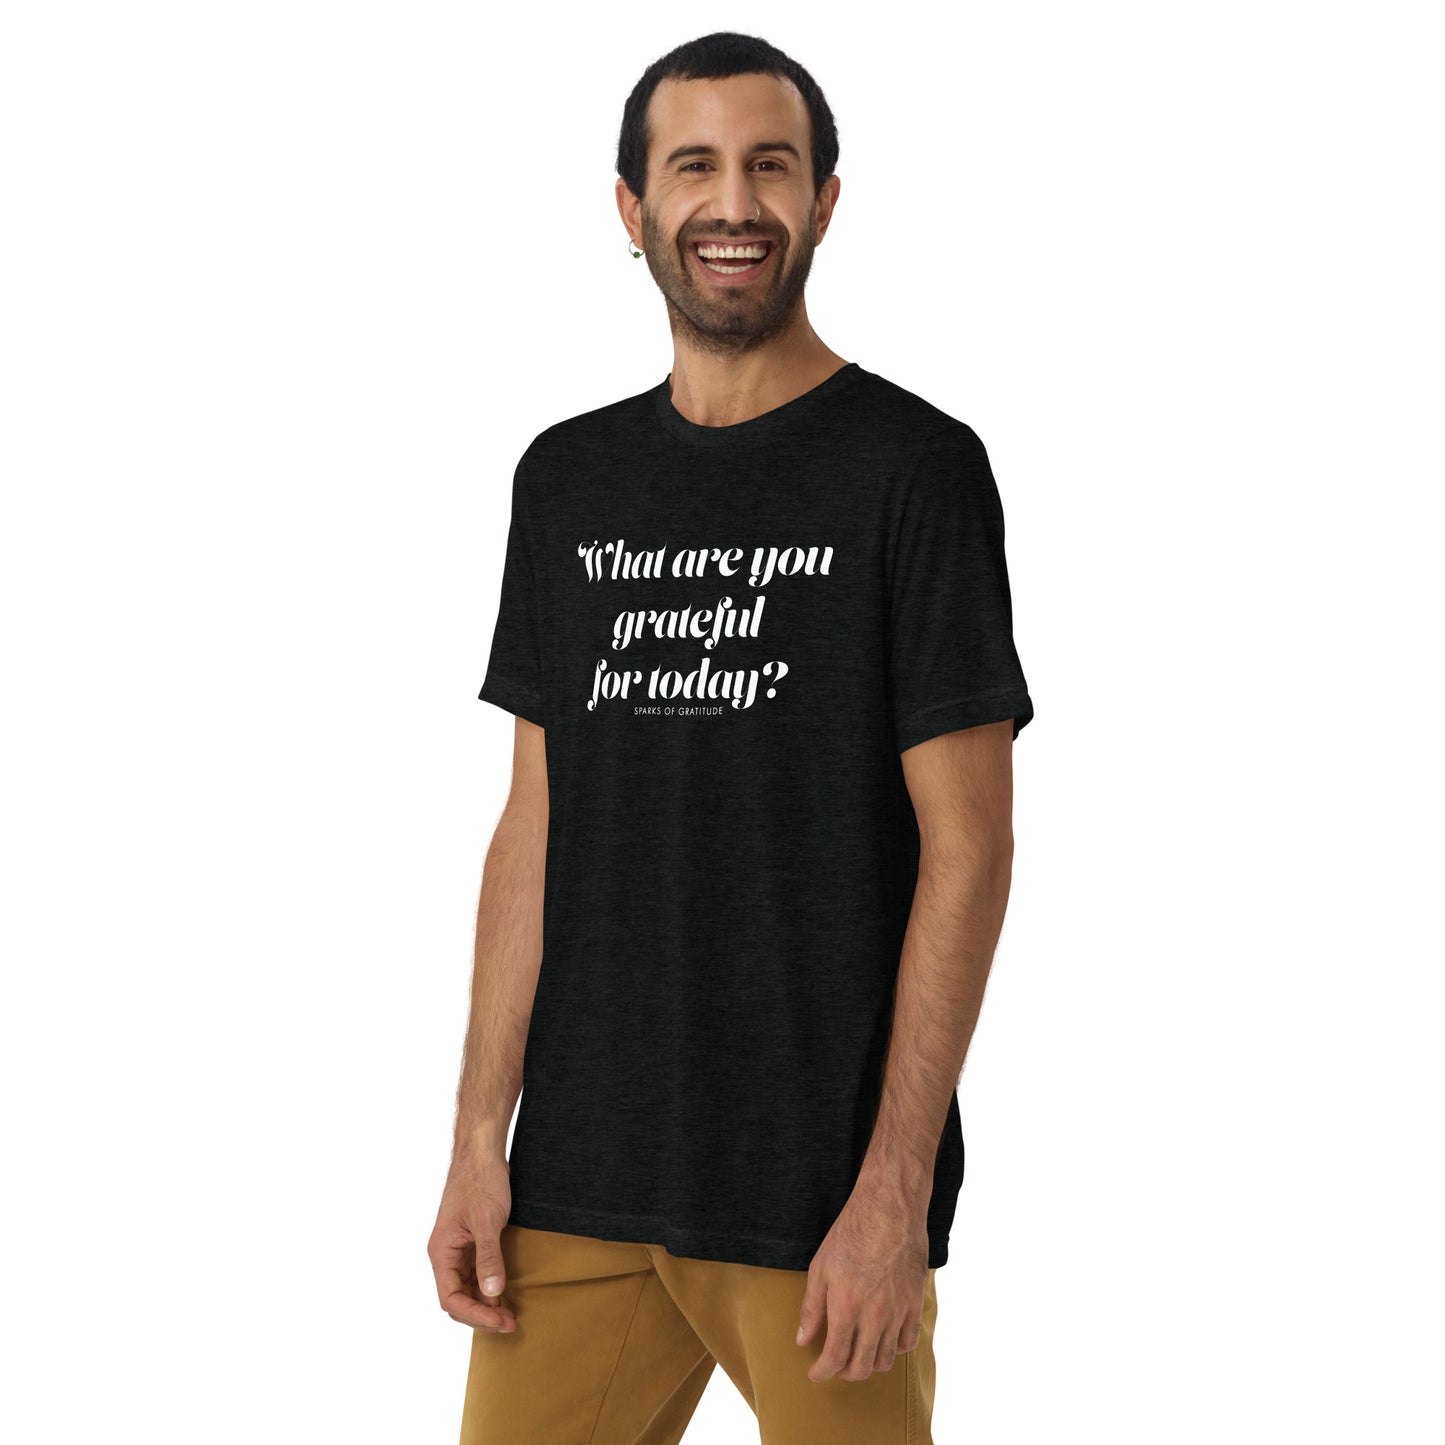 What Are You Grateful For Today Unisex Short sleeve t-shirt